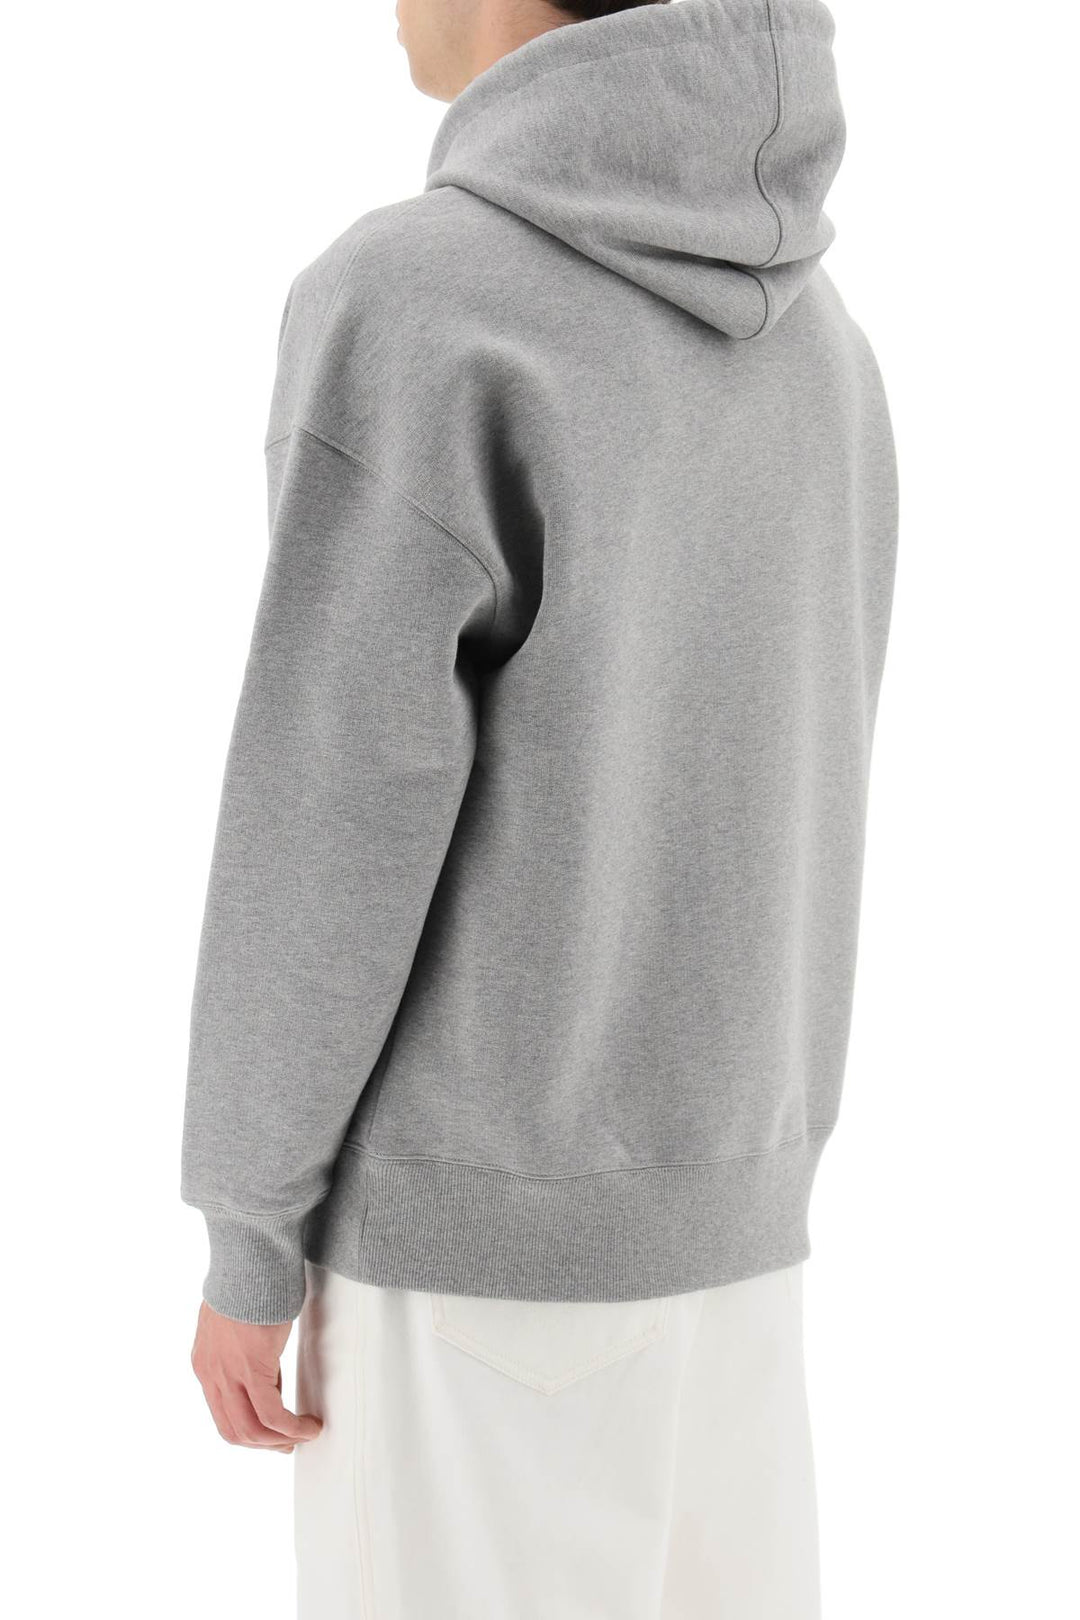 Ami Alexandre Matiussi Hoodie With Lettering Embroidery   Grigio